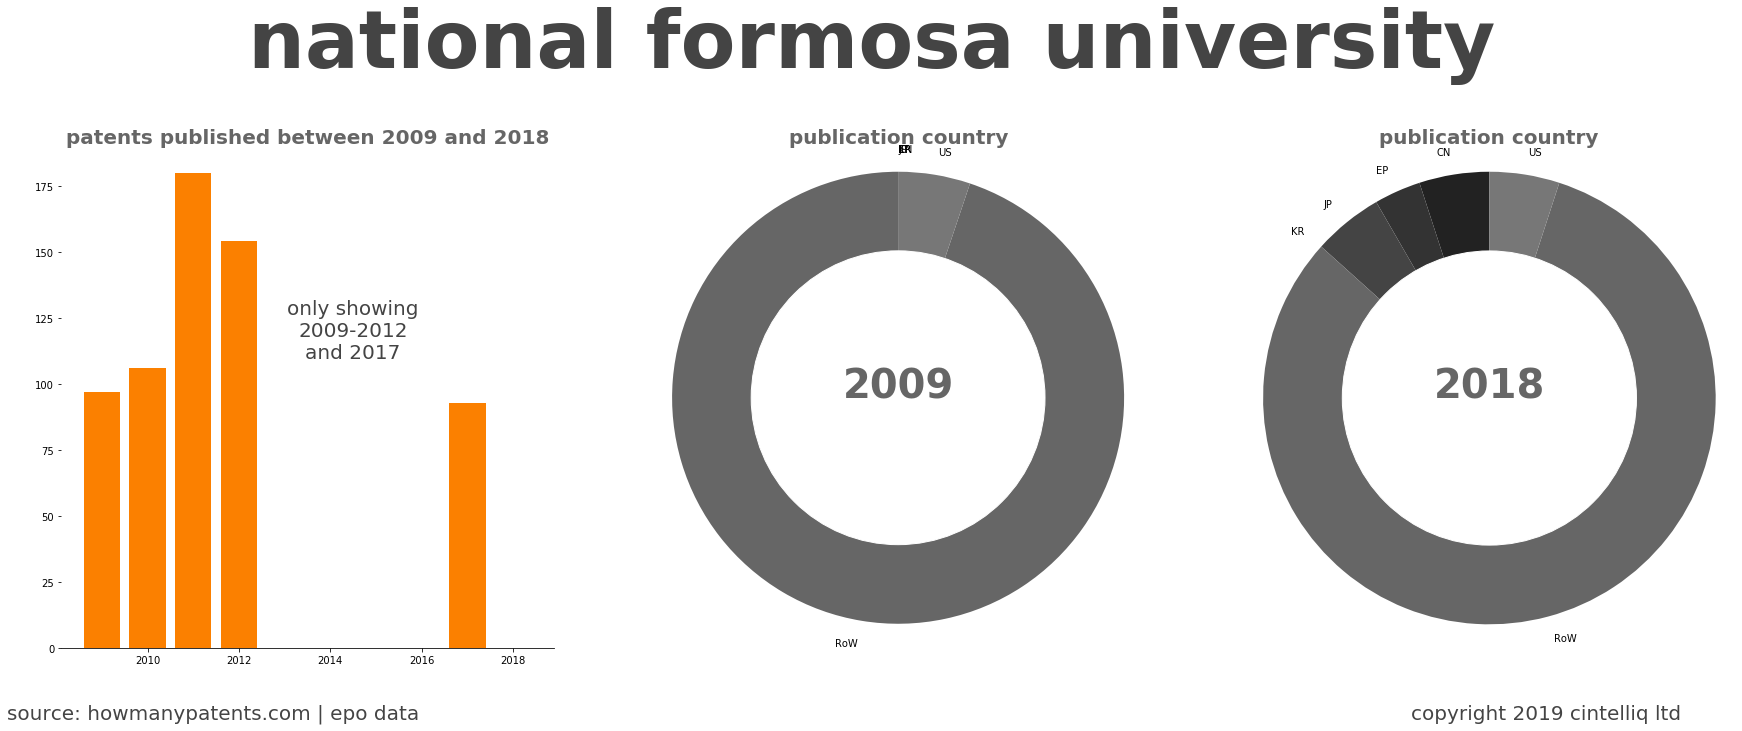 summary of patents for National Formosa University